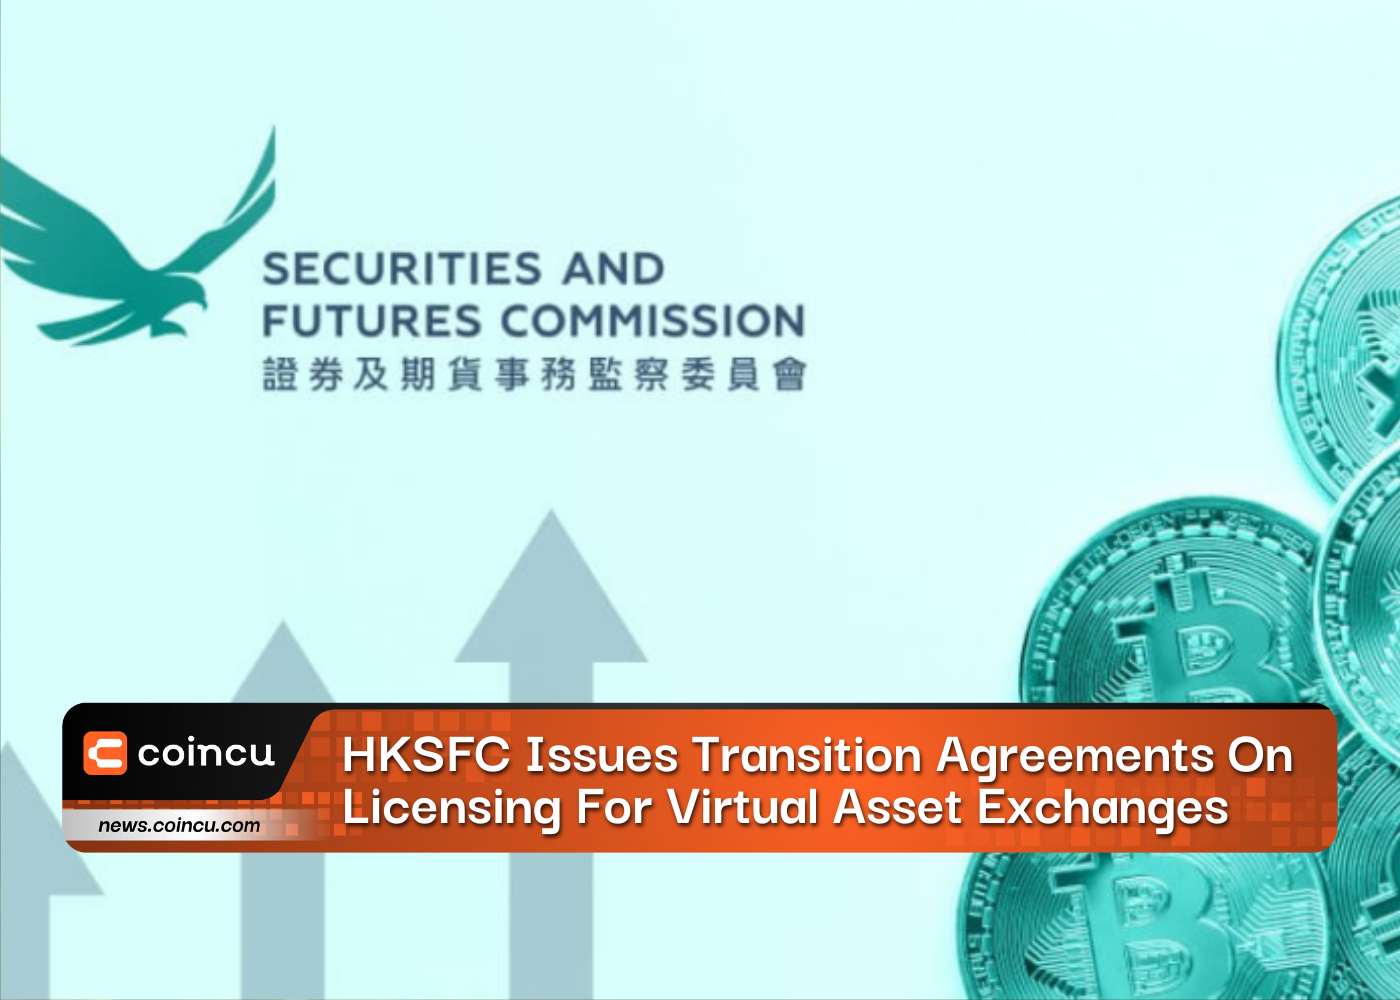 HKSFC Issues Transition Agreements On Licensing For Virtual Asset Exchanges